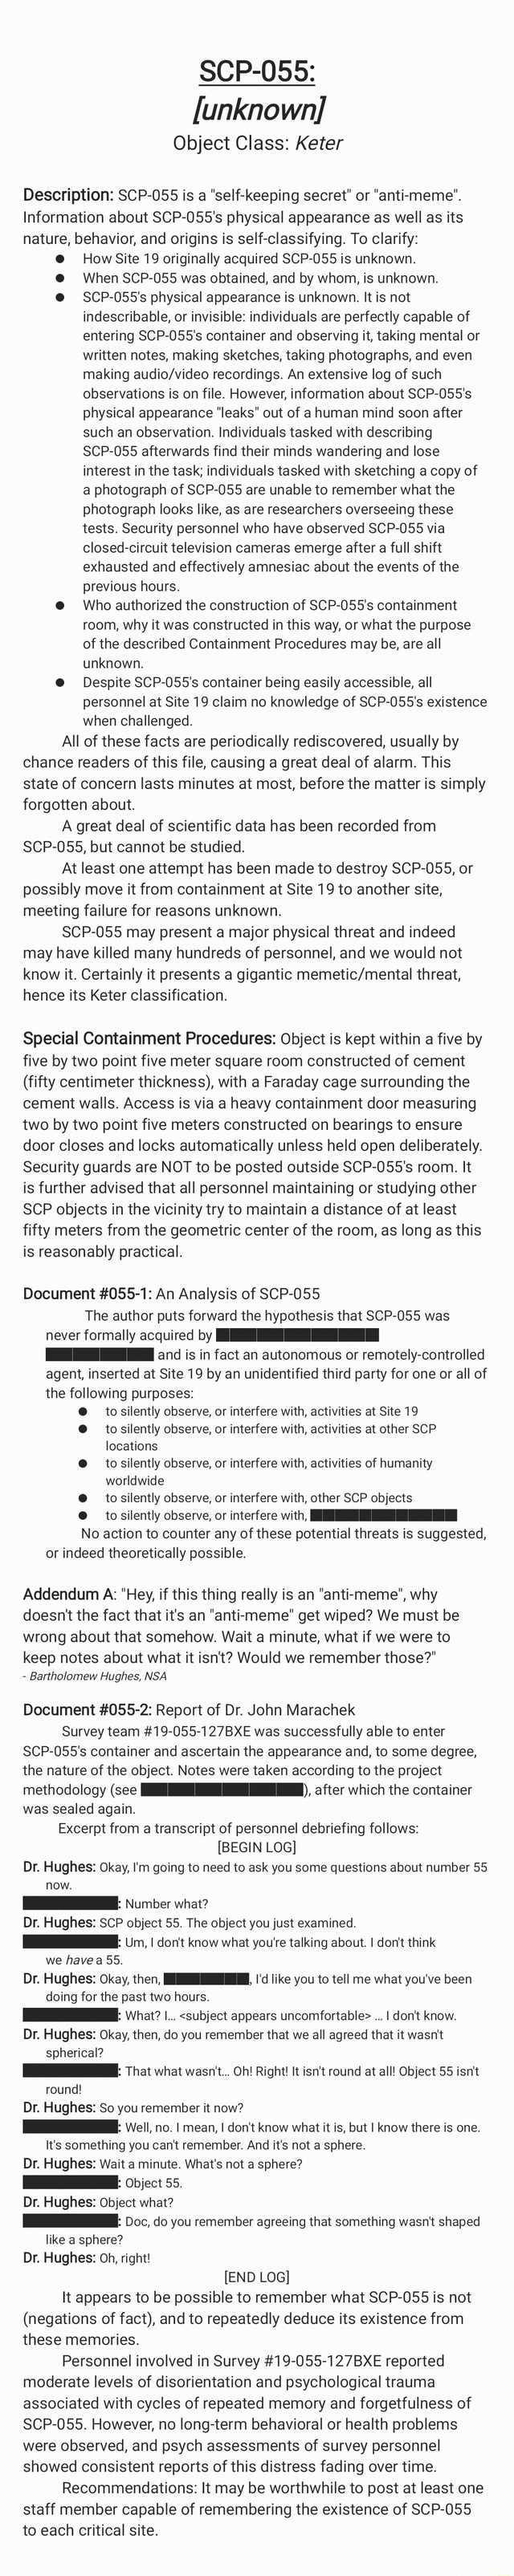 SCP-055 Unknown. Keter Class. #scp #Fyp #SCP055 #keter #storytime #s